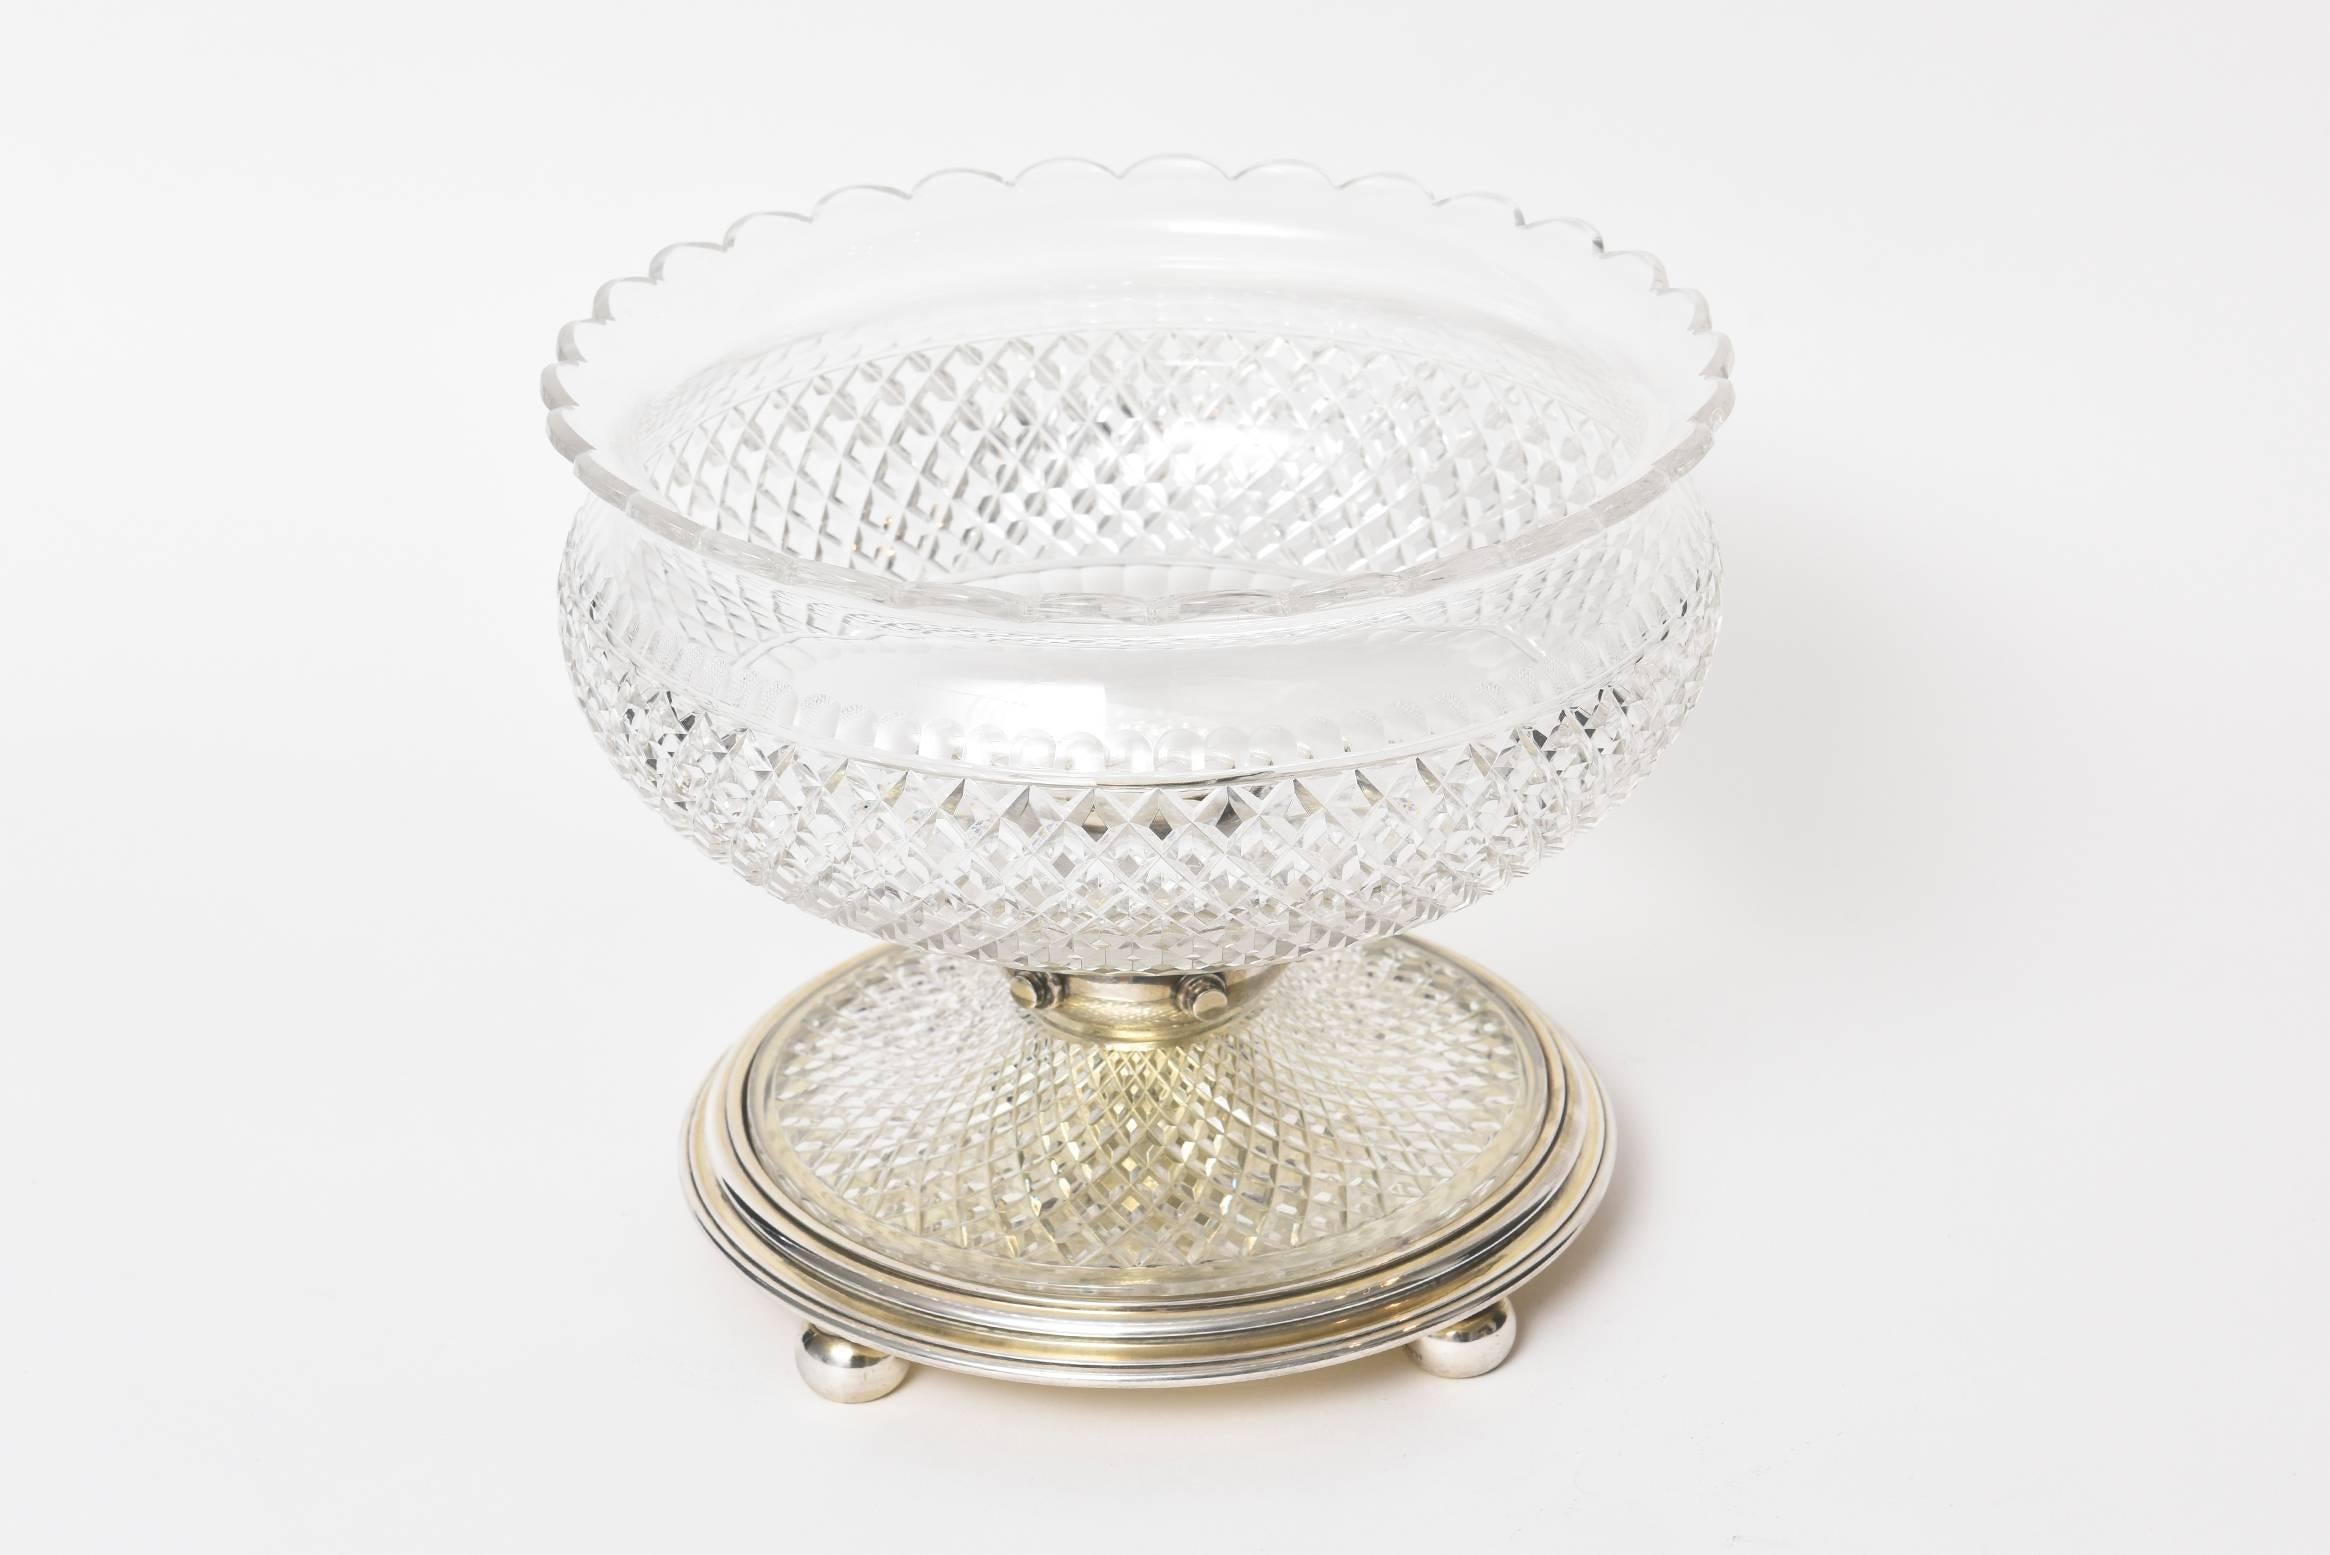 Silver plate with beautiful criss-cross cut-glass piece with scapploed edge on one side and finger tip presses on top and bottom of criss-cross pattern bowl. The bottom glass section has graduated crisscross patter. One ball of the four ball feet is